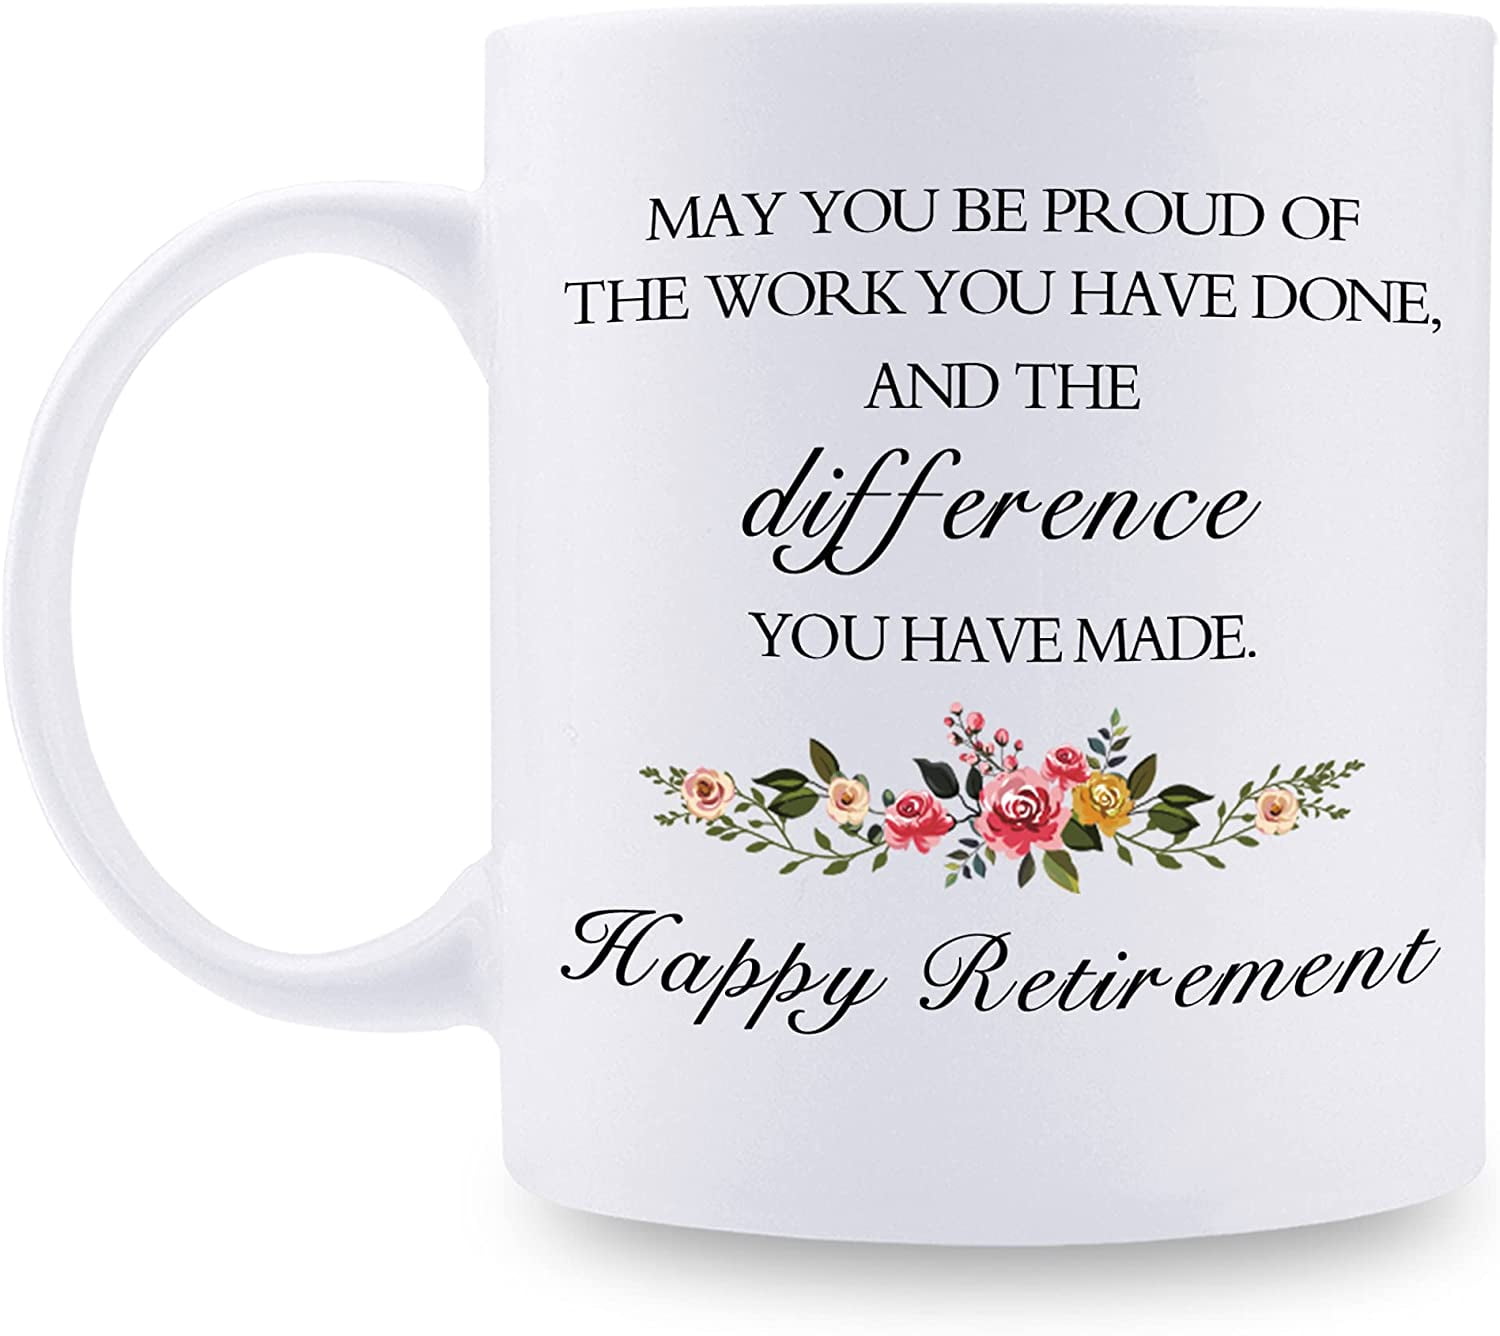 Retirement Gifts for Women - Due